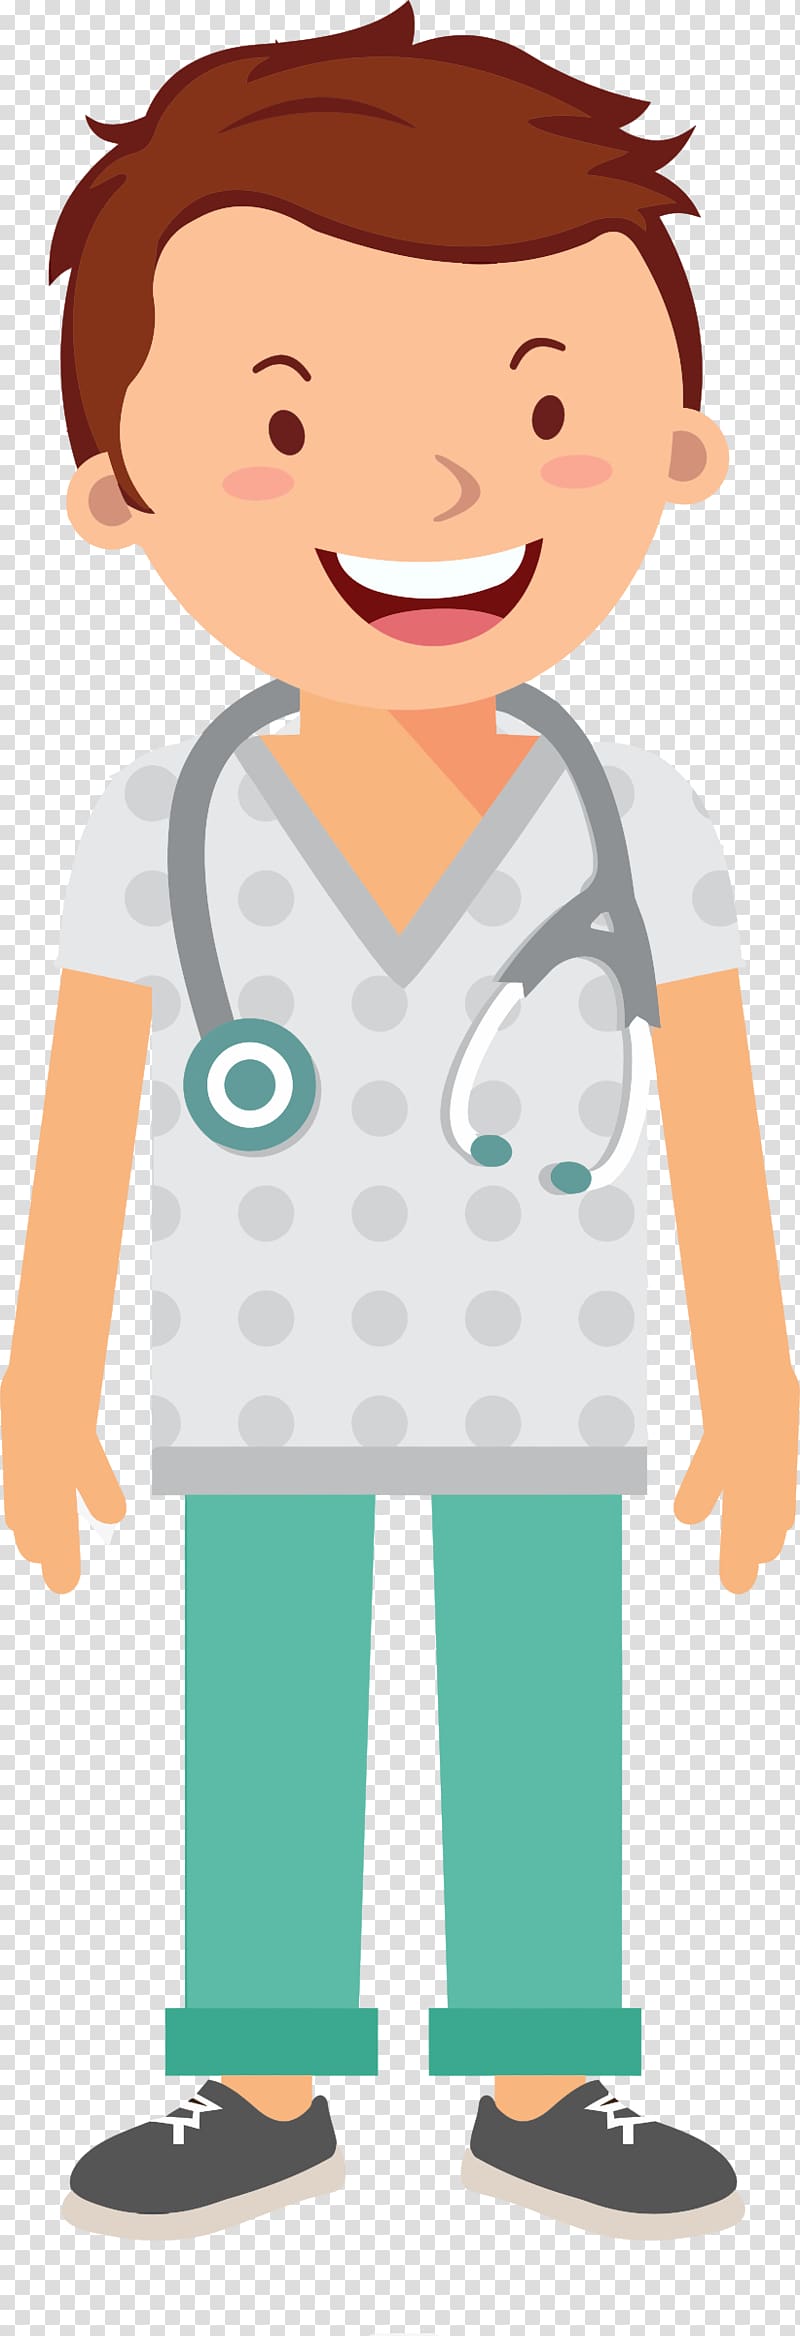 Portable Network Graphics Physician Open Medicine, doctor of medicine symbol transparent background PNG clipart